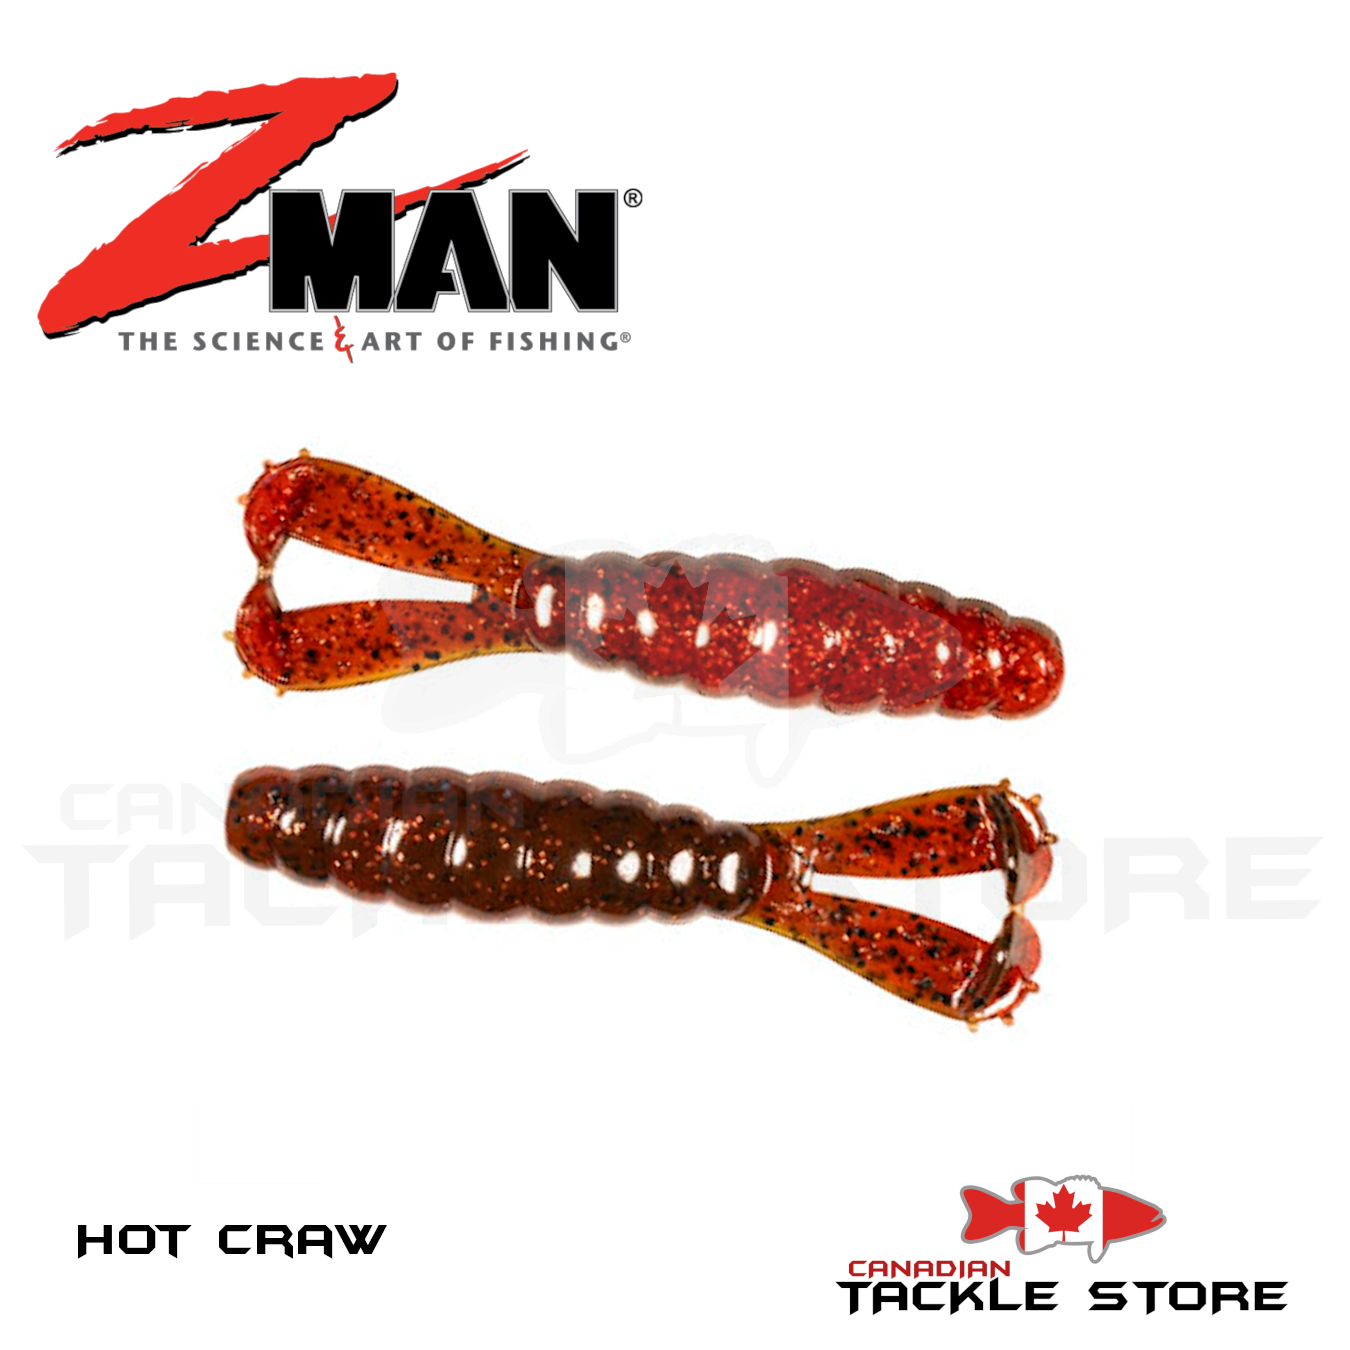 Z-Man Baby GOAT™ – Canadian Tackle Store